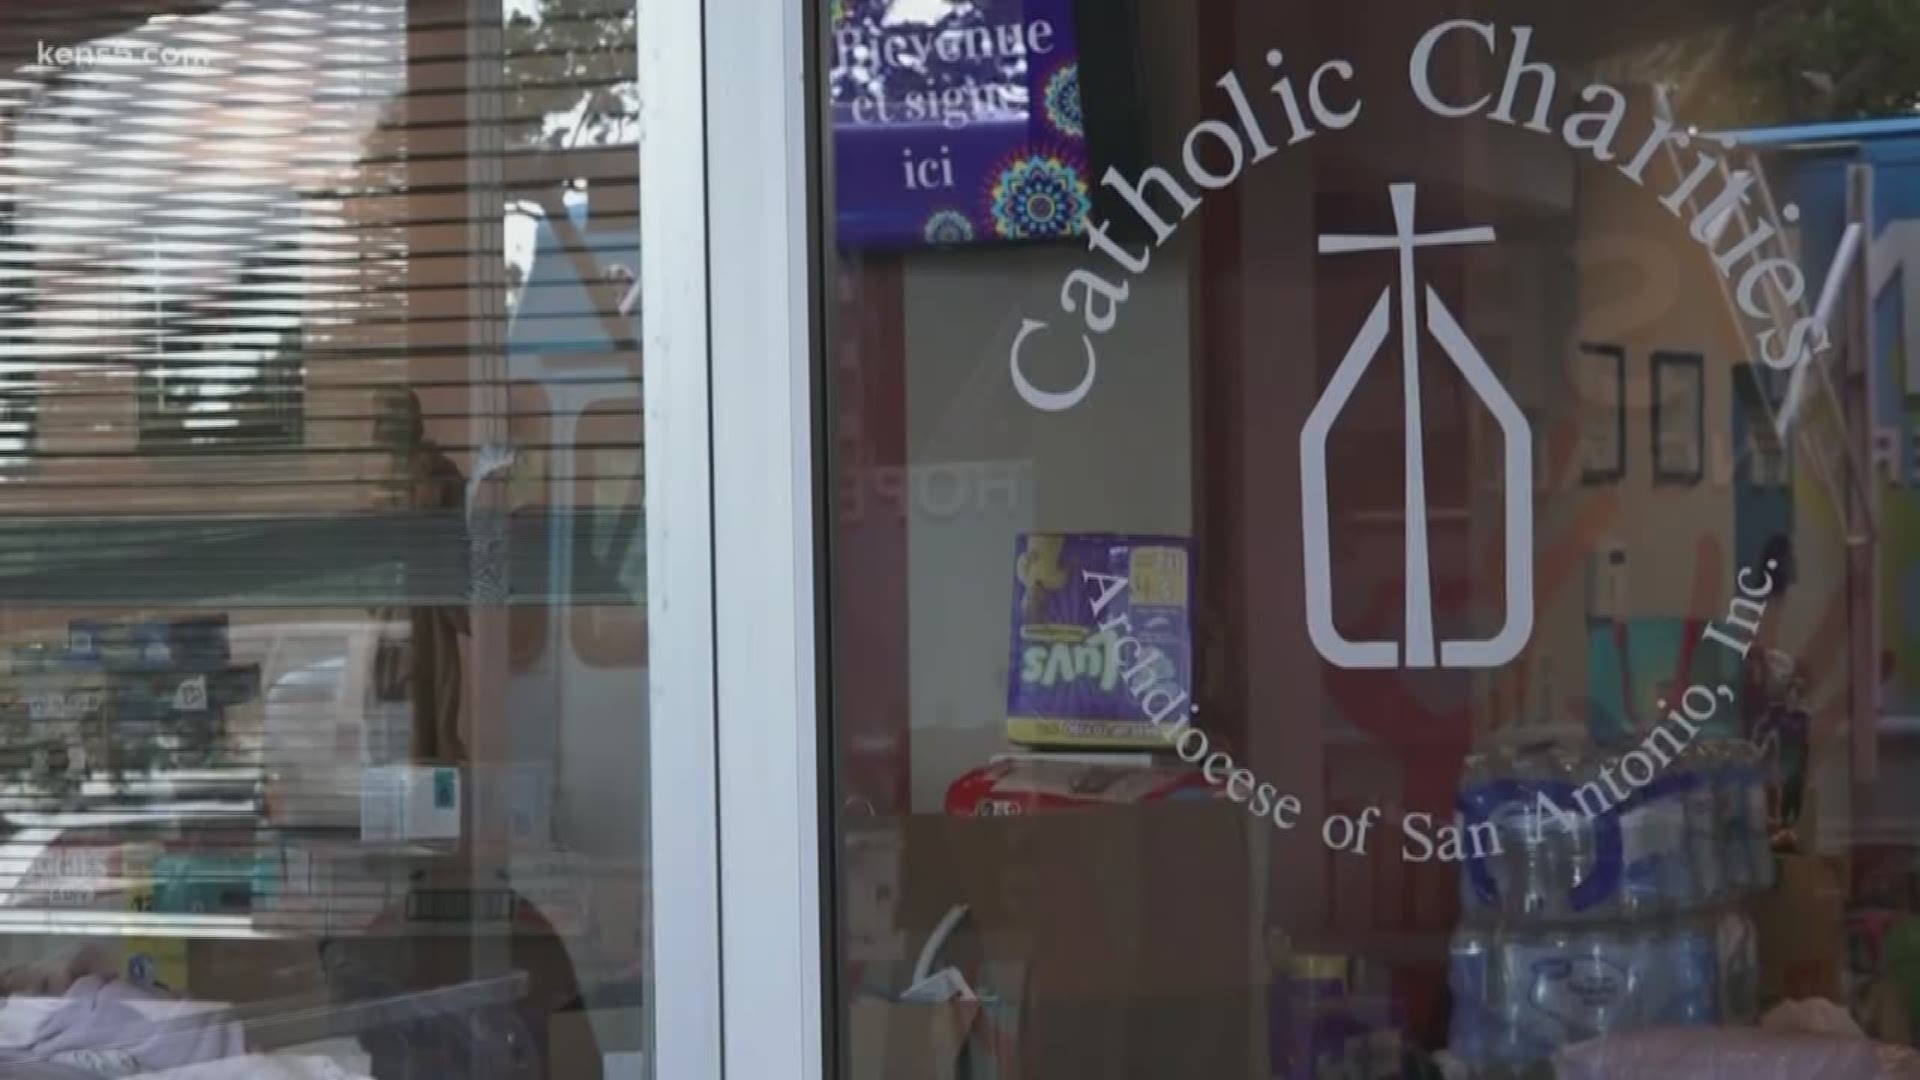 It's a waiting game for Catholic Charities of San Antonio; the group is expecting to re-unite up to 400 families that have been separated. The non-profit has been working non-stop this weekend in preparation. Eyewitness News reporter Henry Ramos has more.